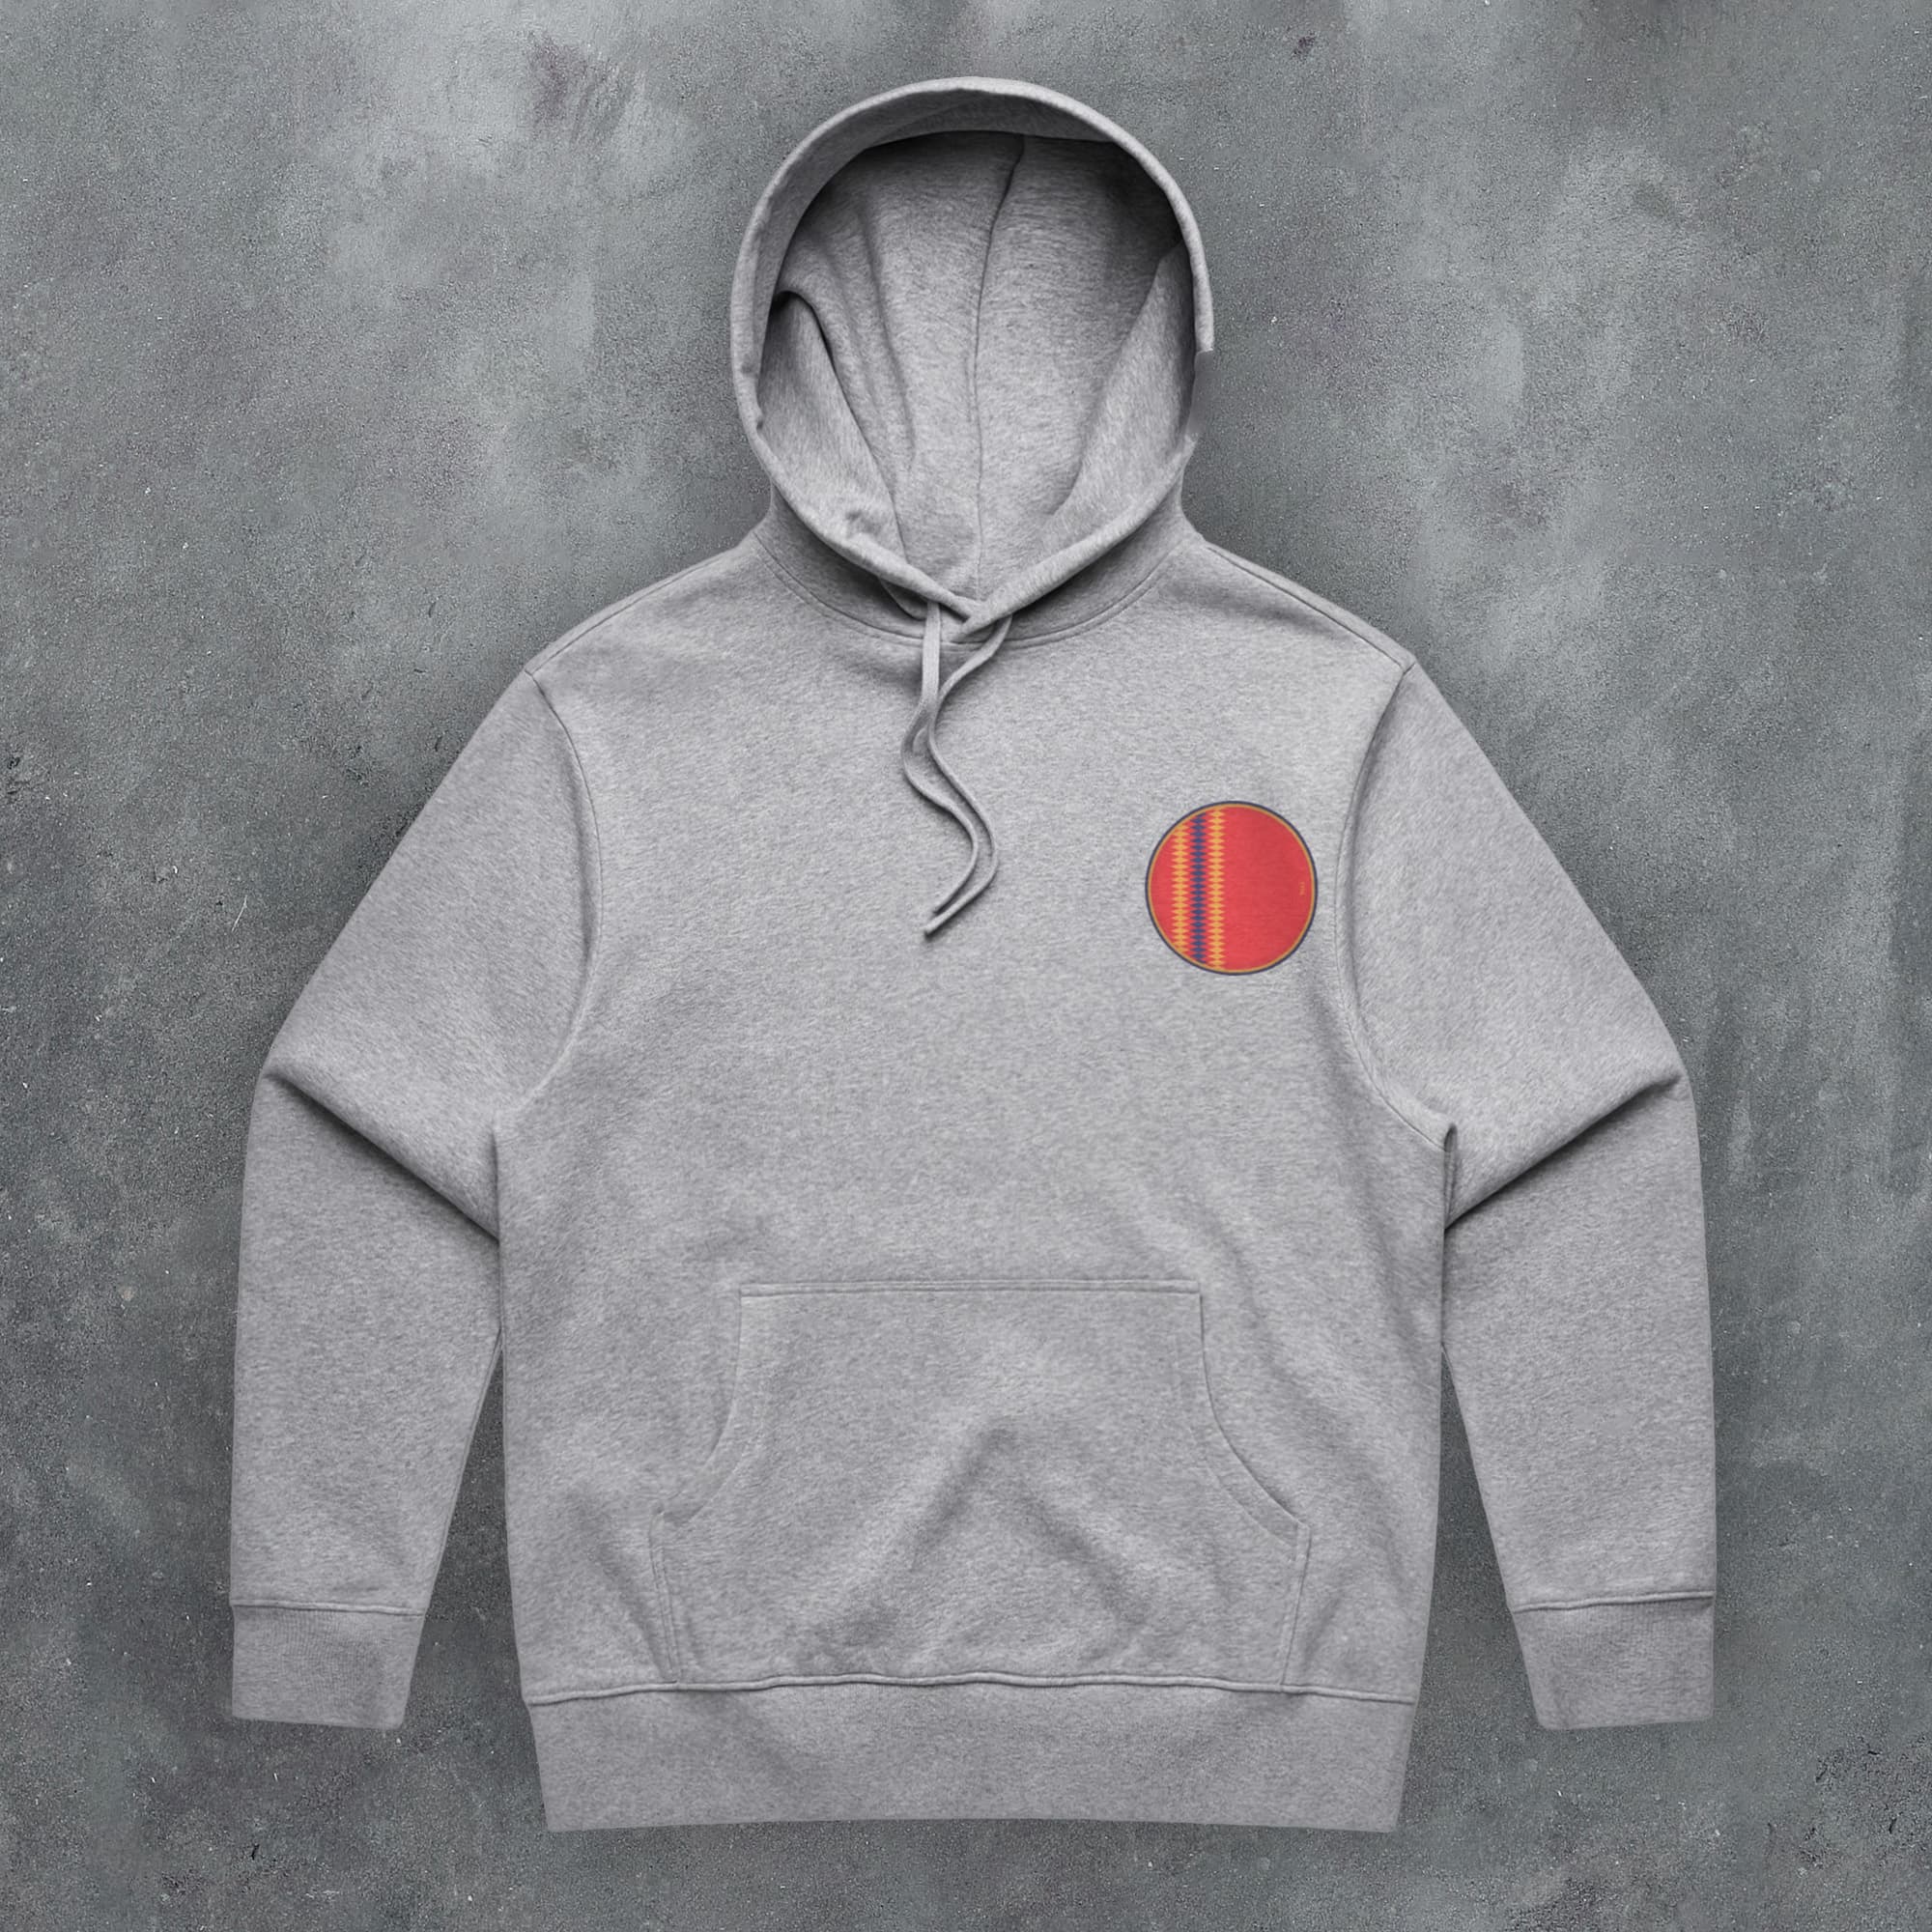 a grey hoodie with a red circle on it